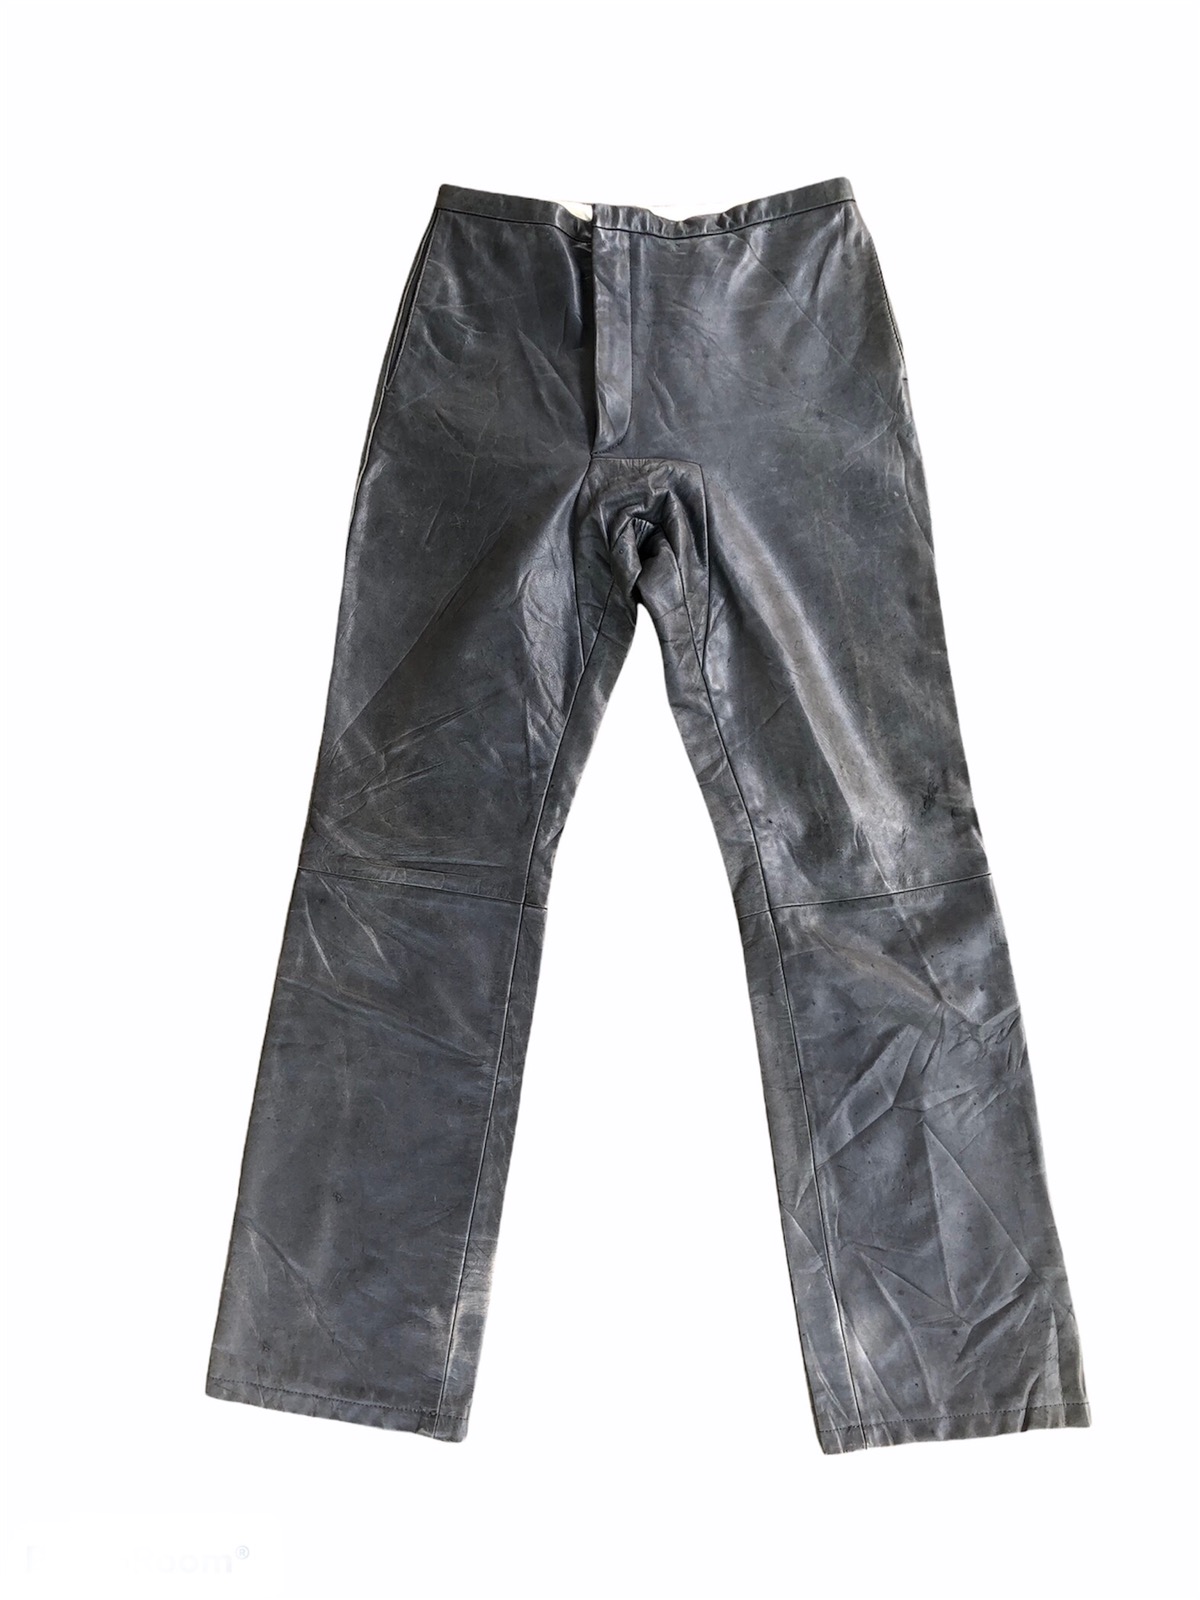 🔥CAROL CHRISTIAN POELL FALL 00-01 LEATHER TROUSER - 2